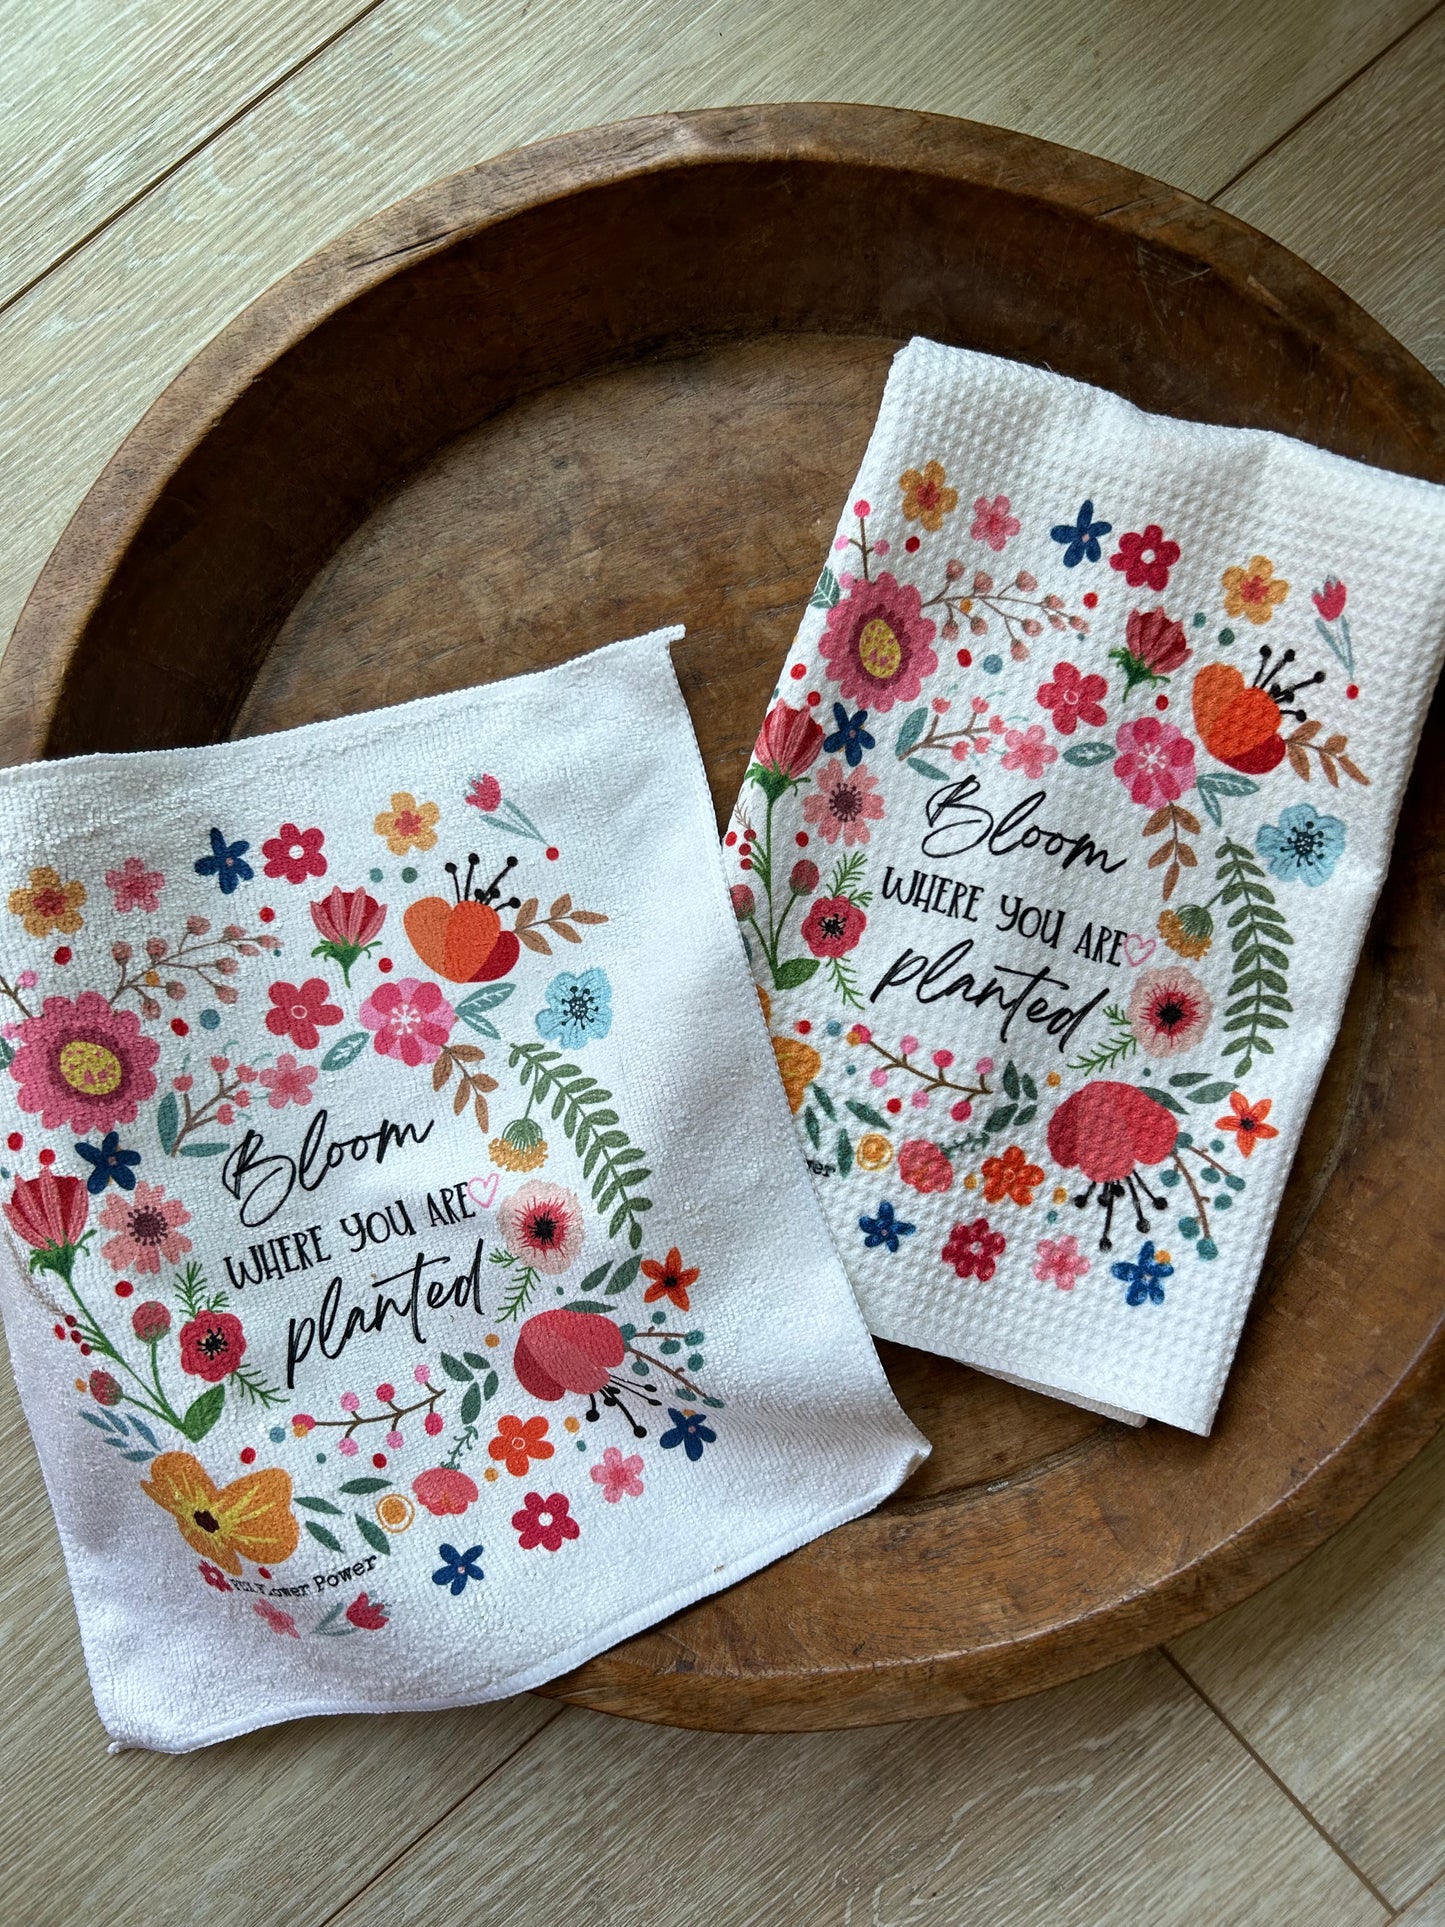 Bloom where you are planted towel set. Fun and functional towel, gifts for gardeners